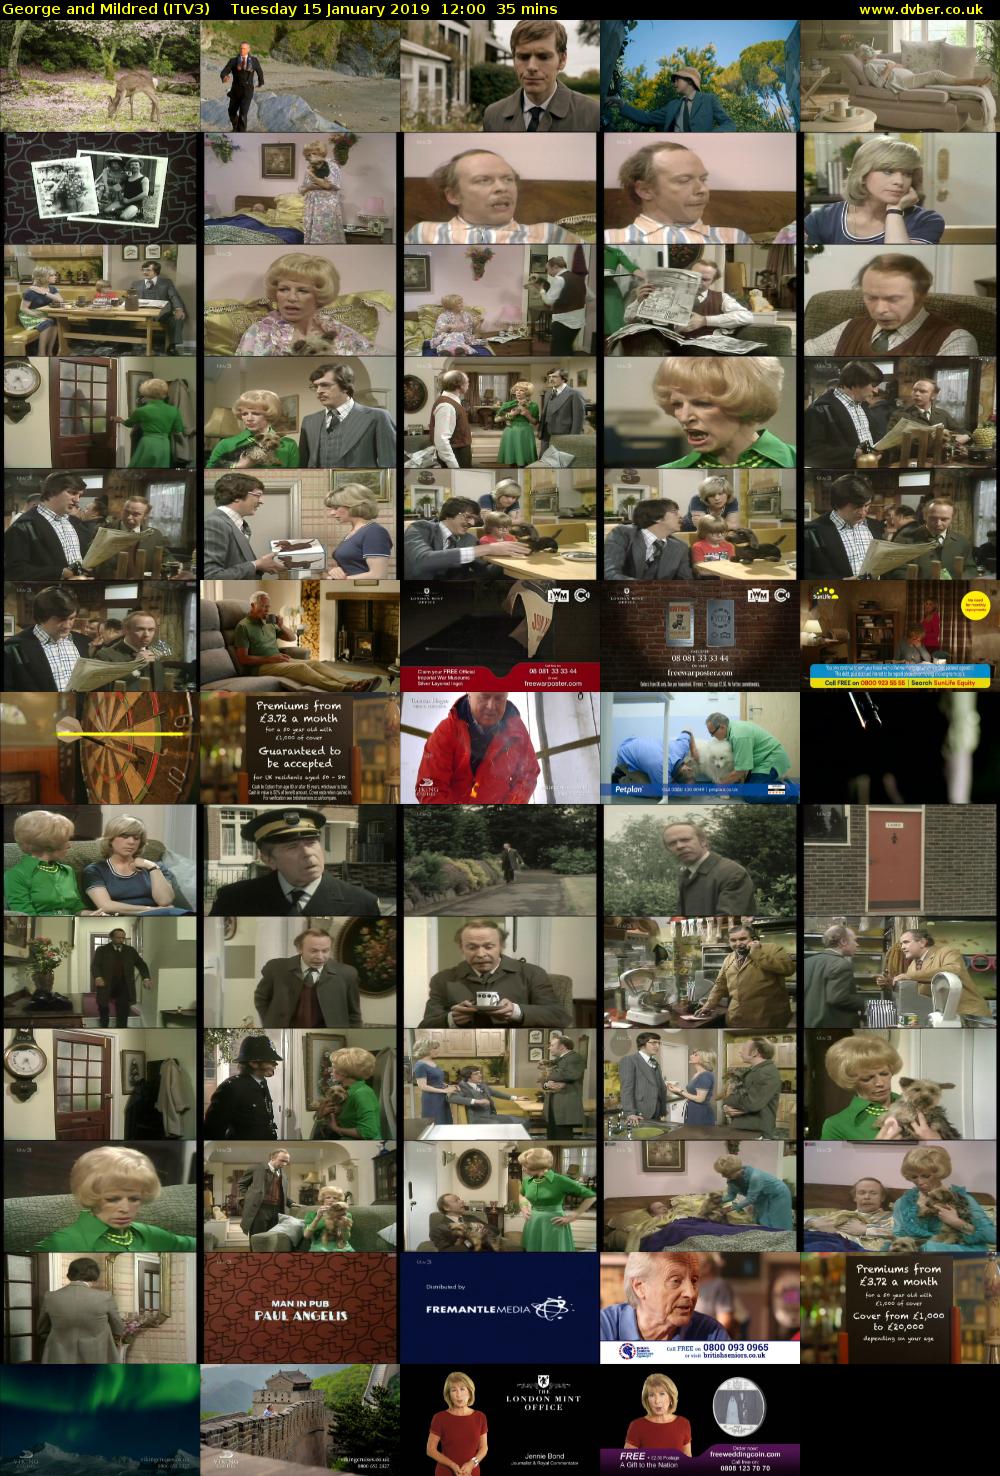 George and Mildred (ITV3) Tuesday 15 January 2019 12:00 - 12:35